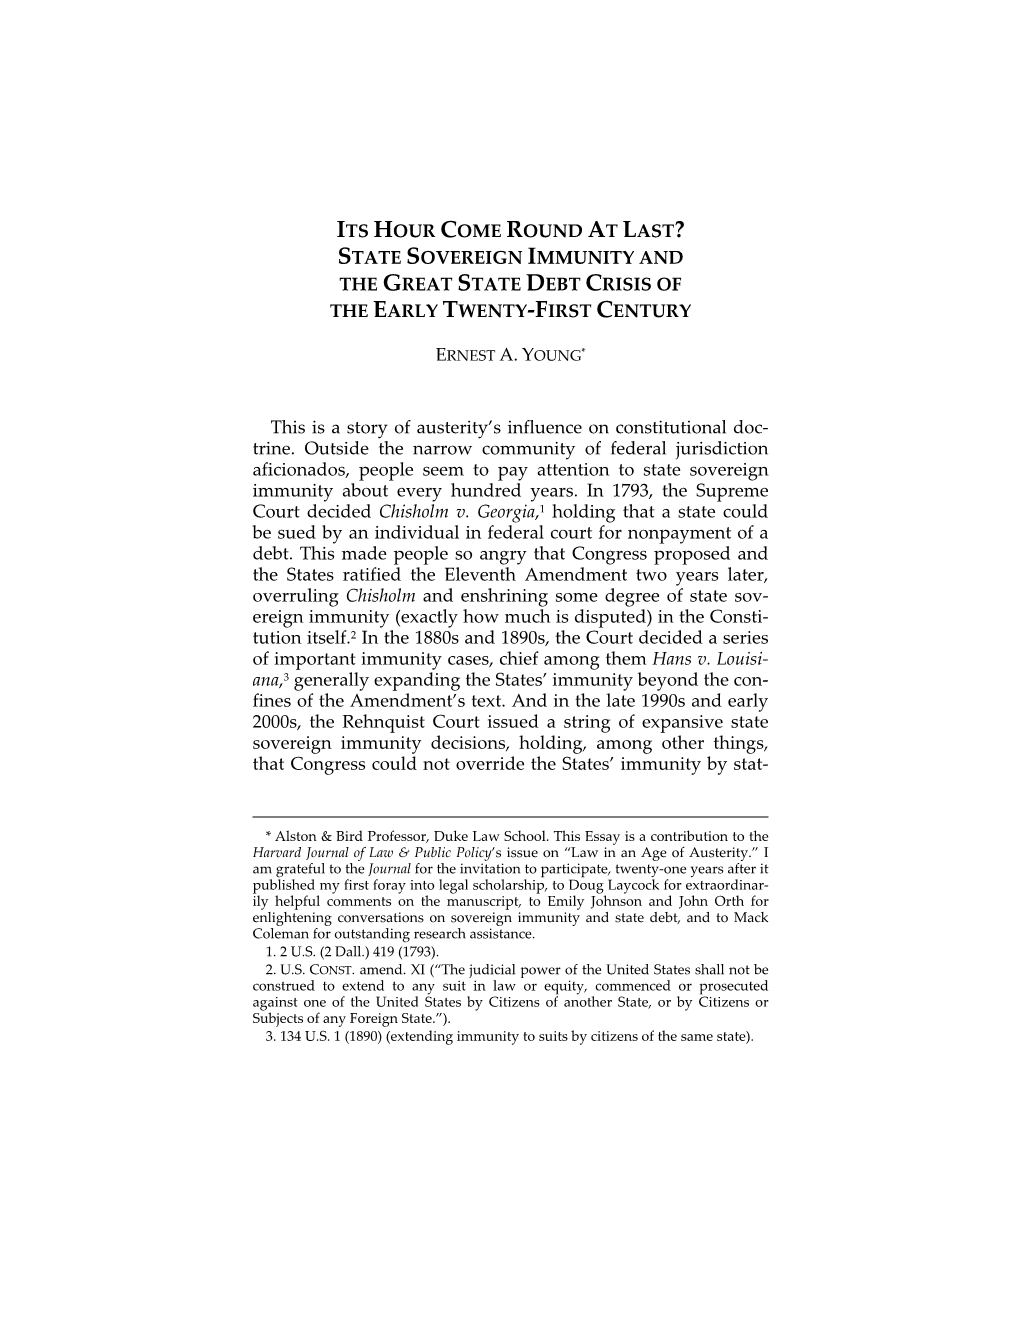 State Sovereign Immunity and the Great State Debt Crisis of the Early Twenty‐First Century